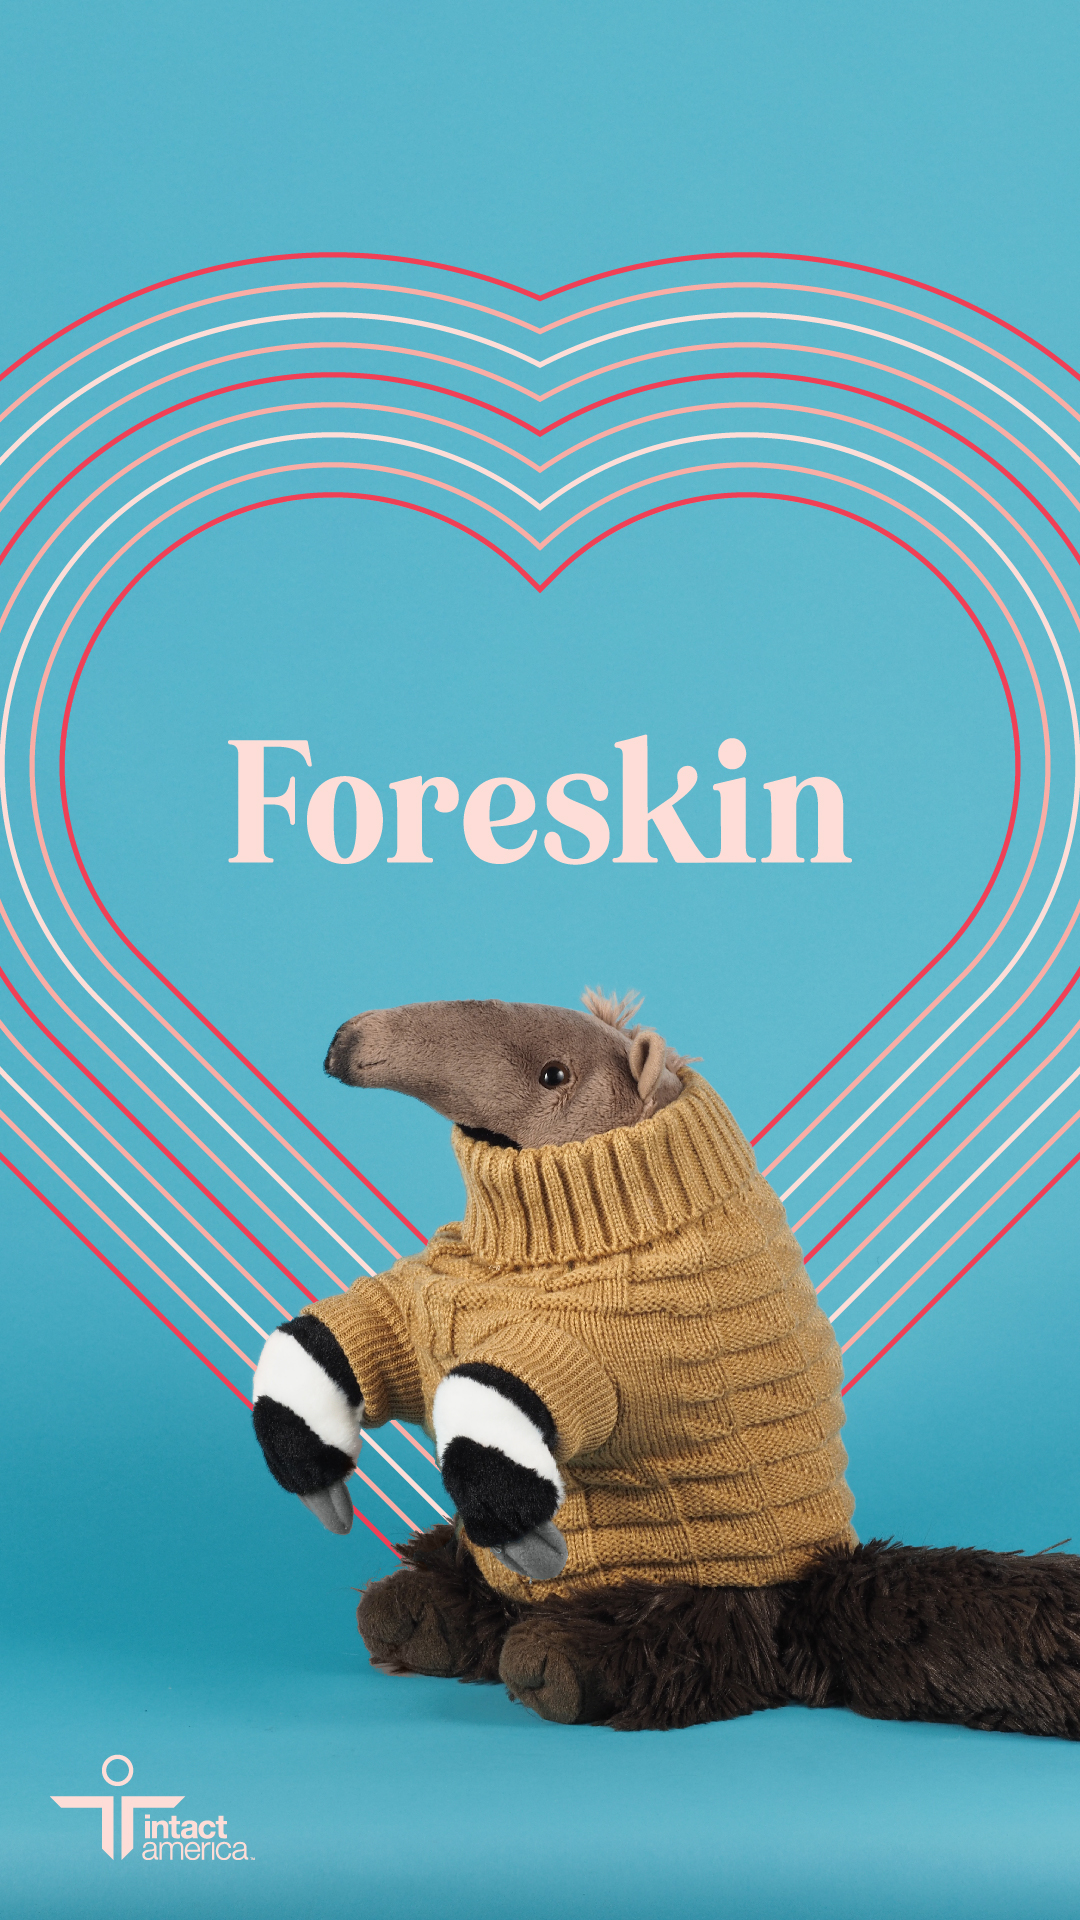 Image of an anteater plush wearing a turtleneck and the text 'foreskin' inside a heart